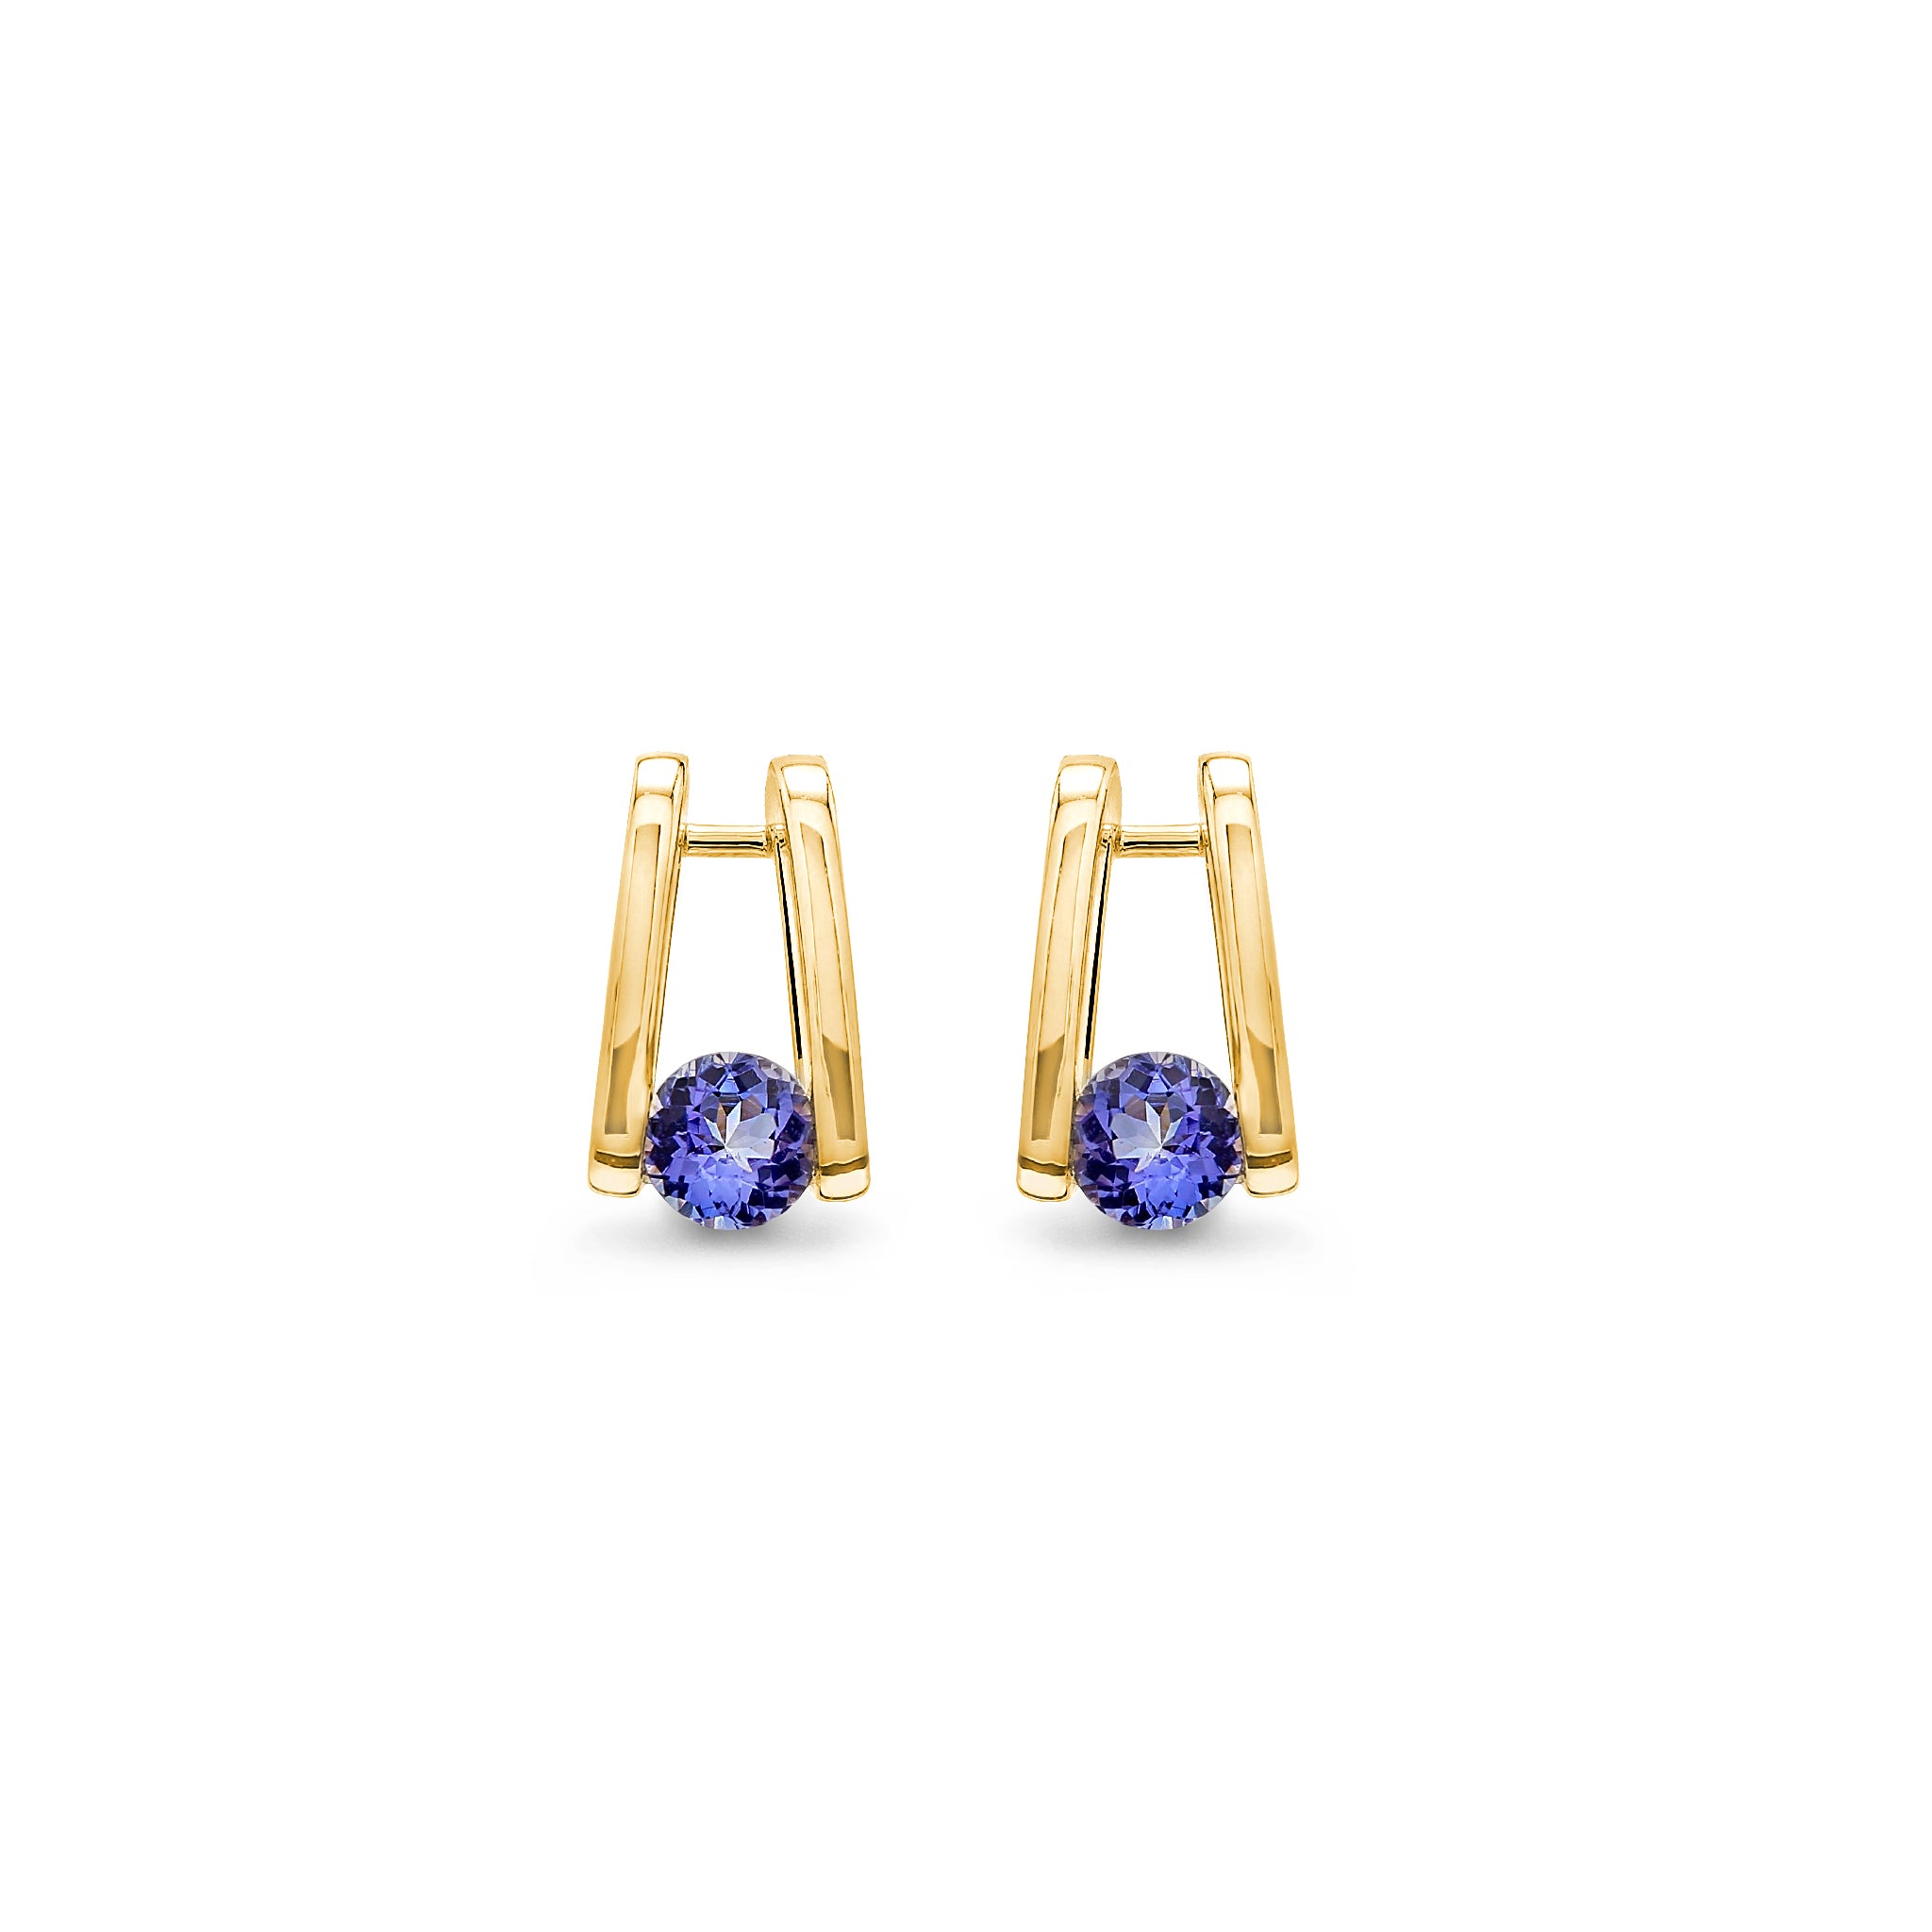 Millennium Classic Tanzanite Stud Earrings 0.80 Carat in 14K Yellow Gold Front View